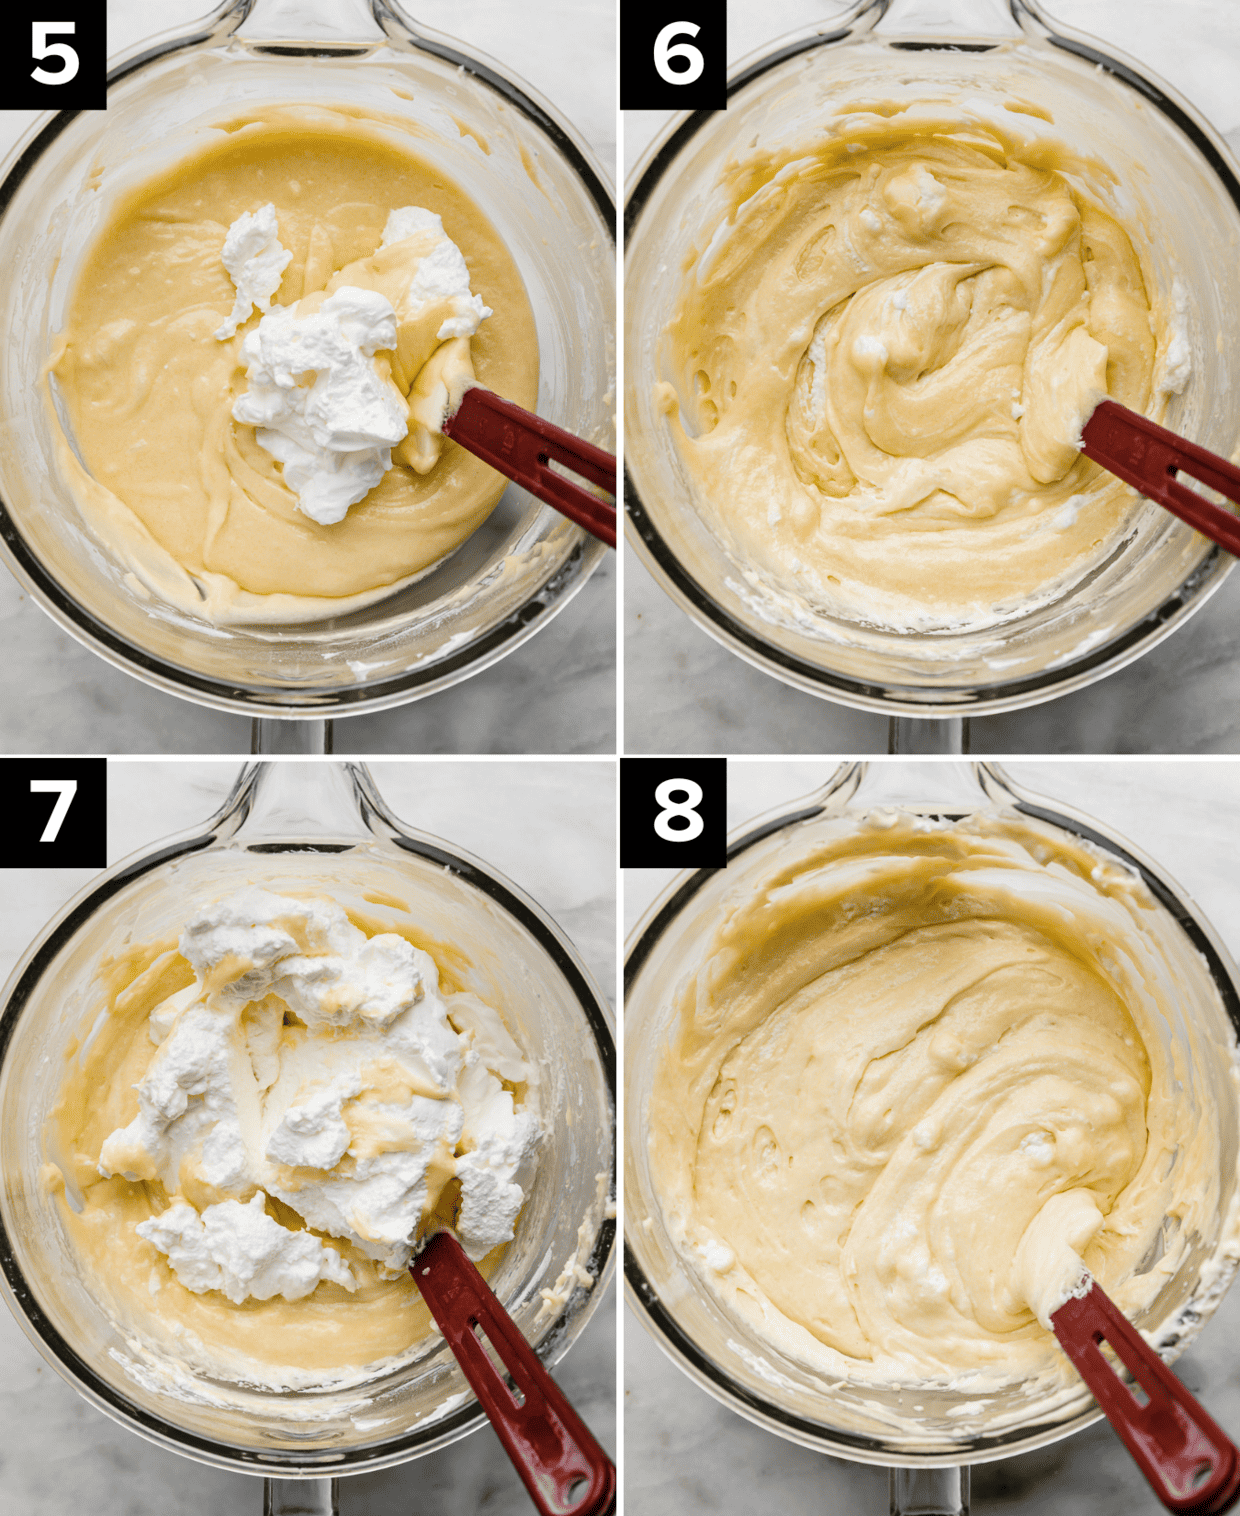 Four images showing the sequencing of folding in egg whites into a yellow cake batter that's in a glass mixing bowl.